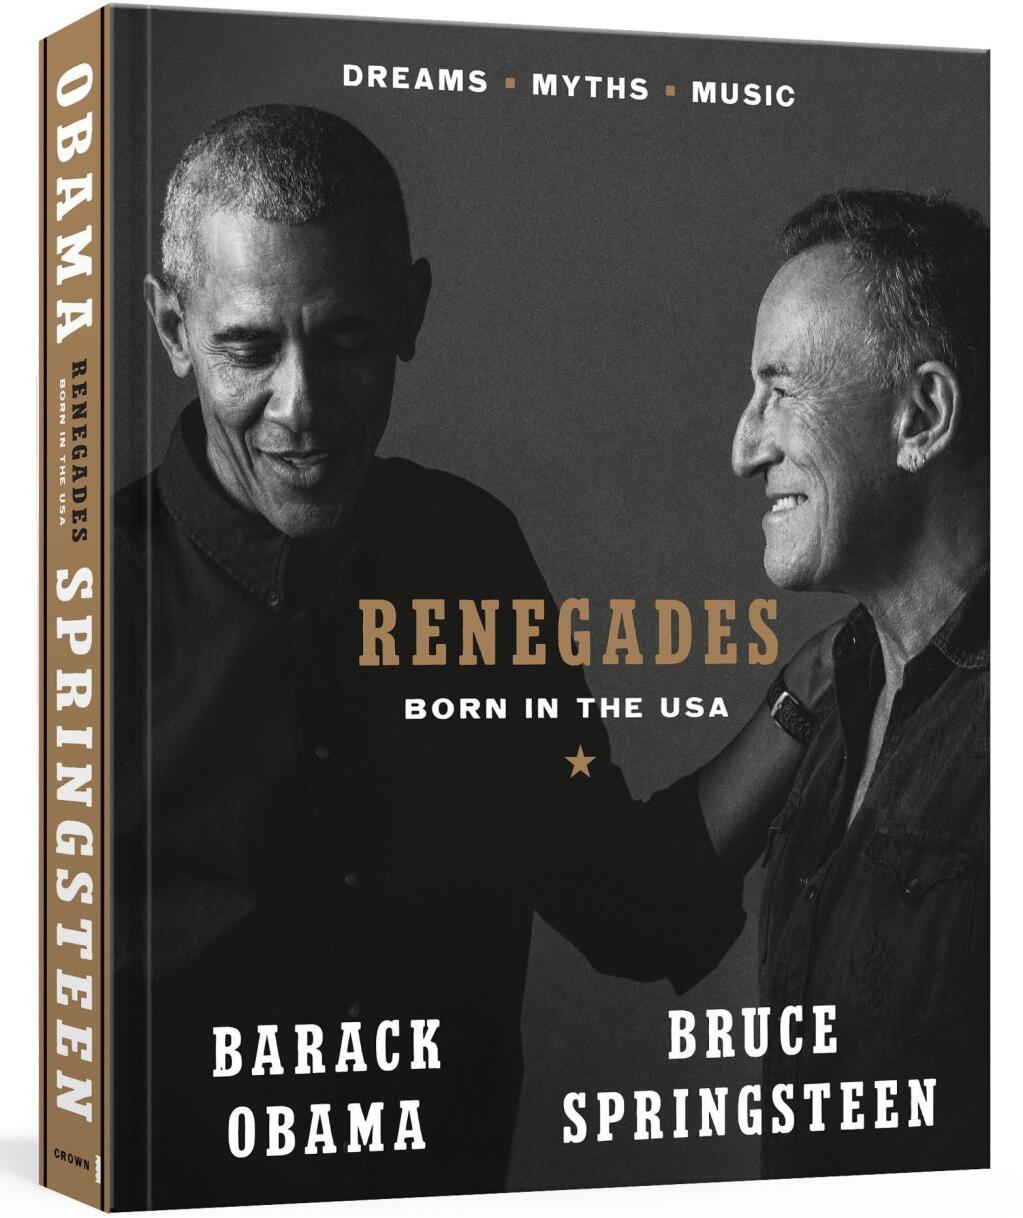 “Renegades,” by Barack Obama and Bruce Springsteen, is the No. 5 book in Petaluma this week. (CROWN BOOKS)